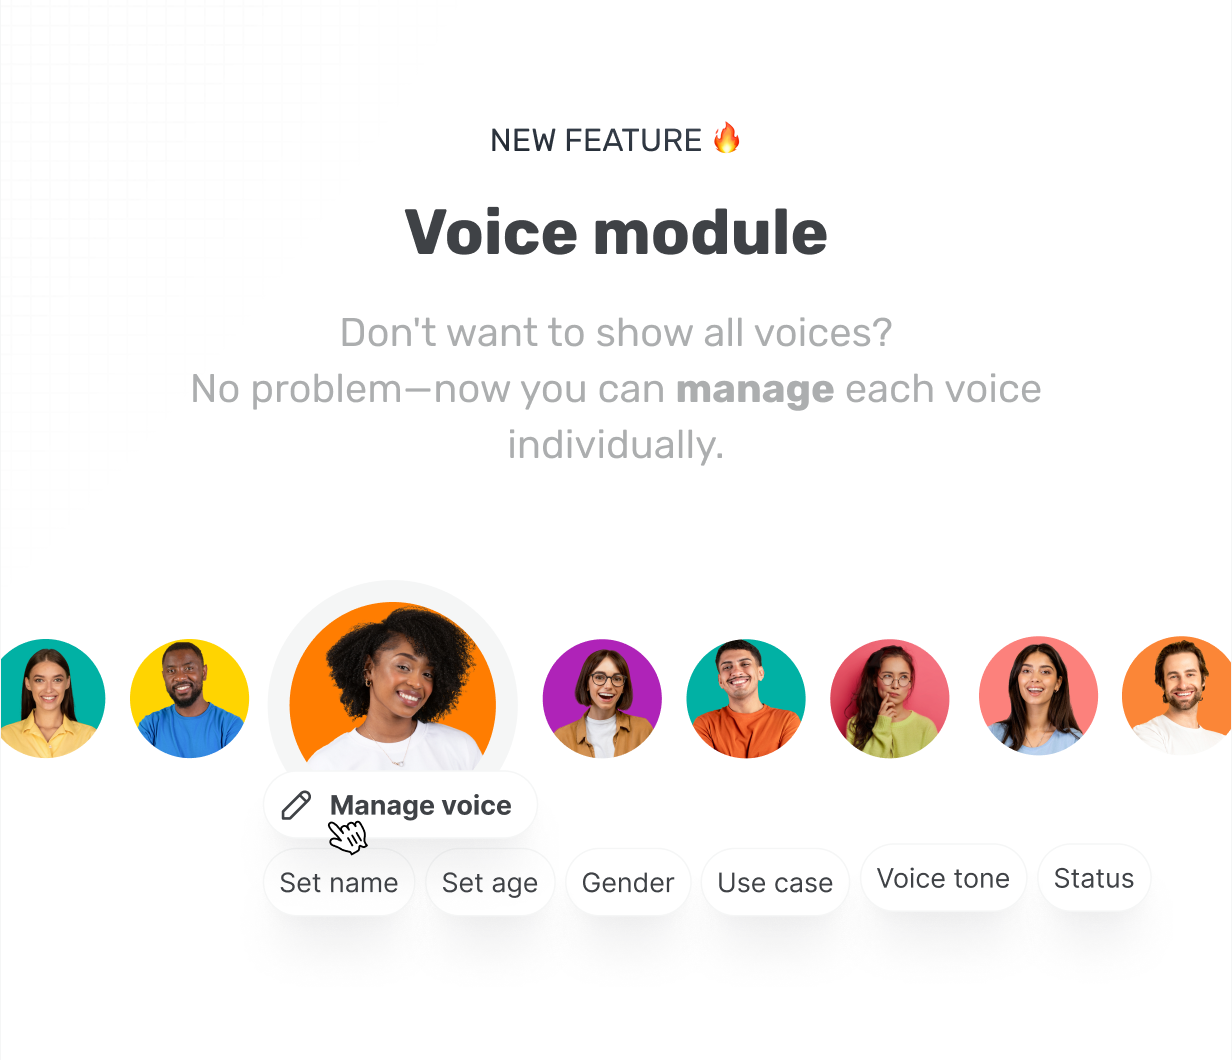 Don't want to show all voices? No problem, now you can manage each voice individually. @heyaikeedo [HASH=13823]#aikeedo[/HASH]